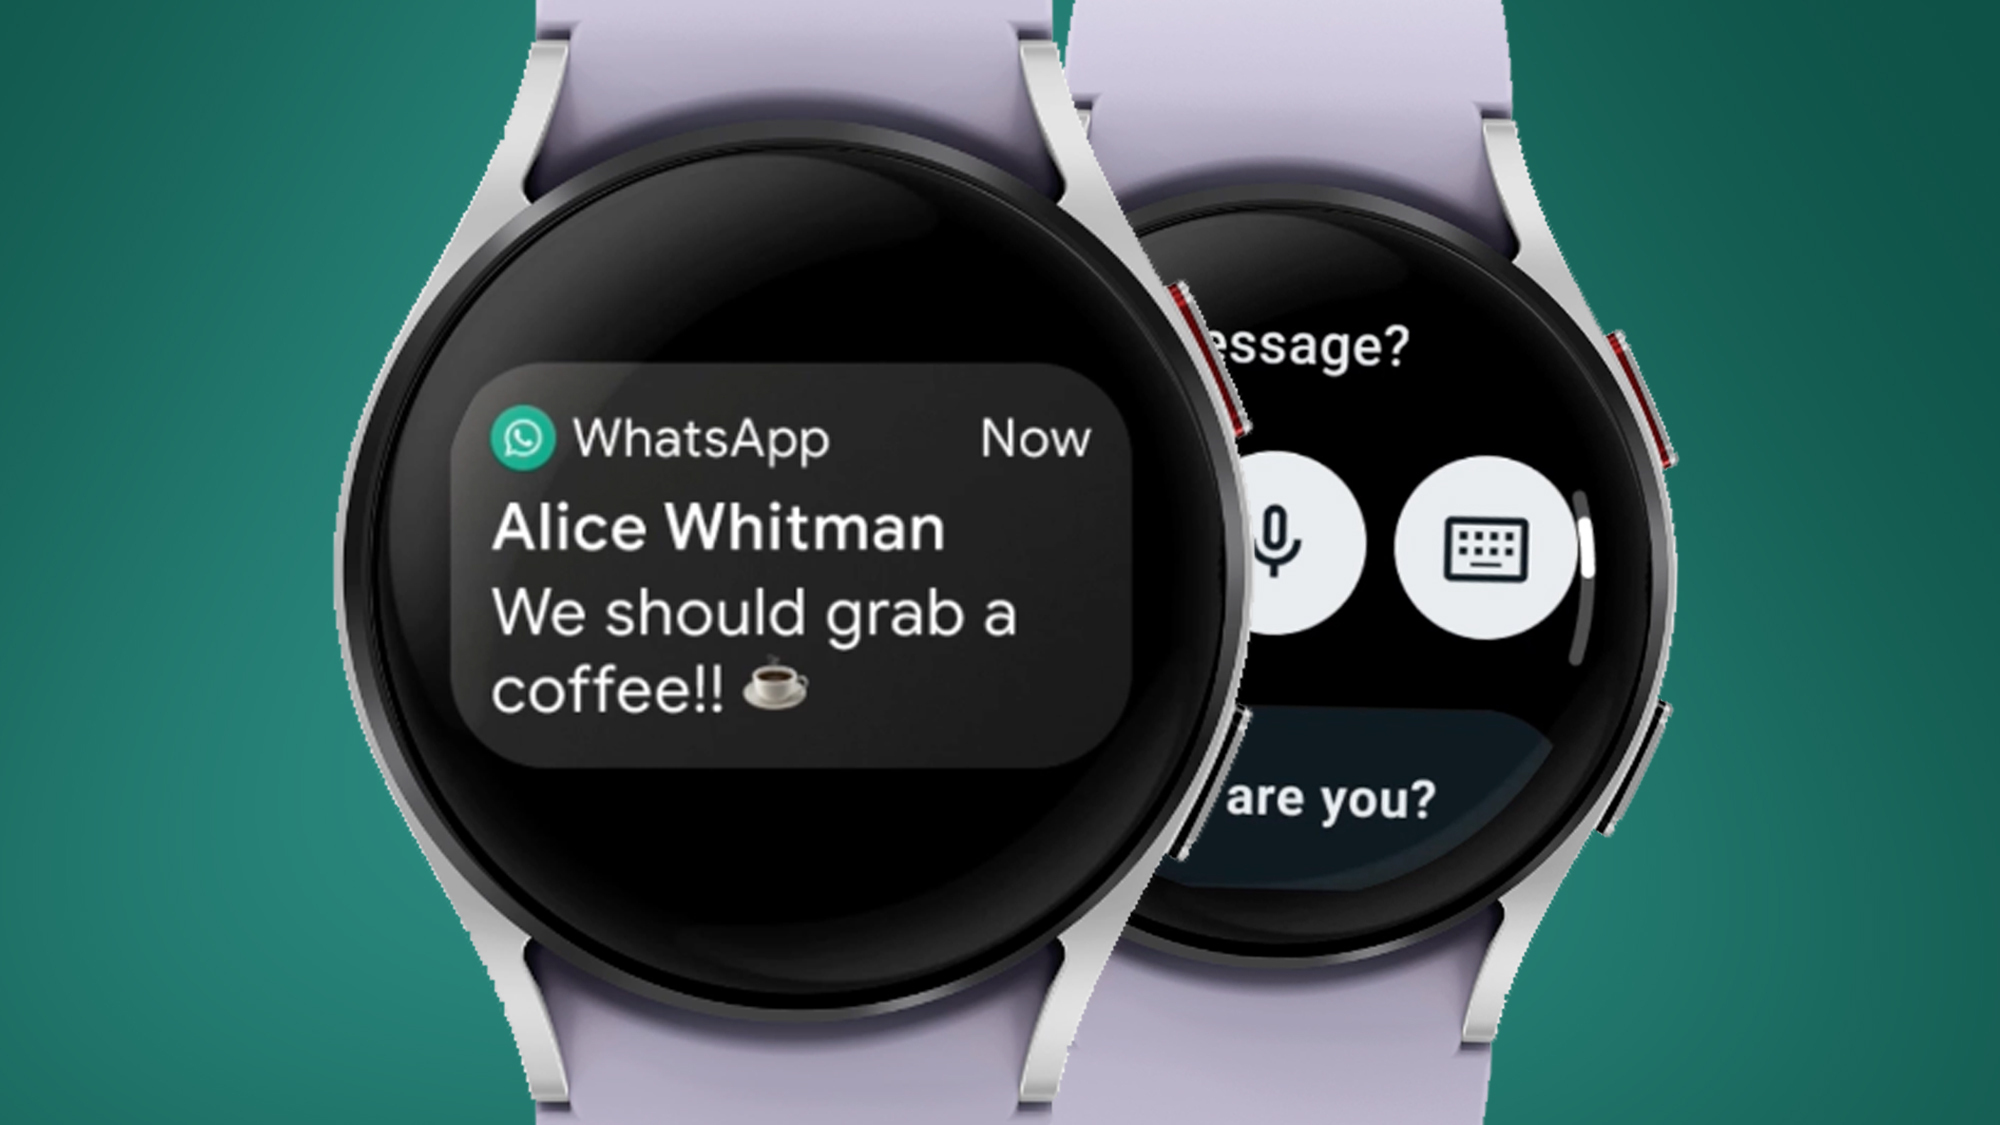 WhatsApp launches on WearOS helping you stay connected without a smartphone  | TechRadar